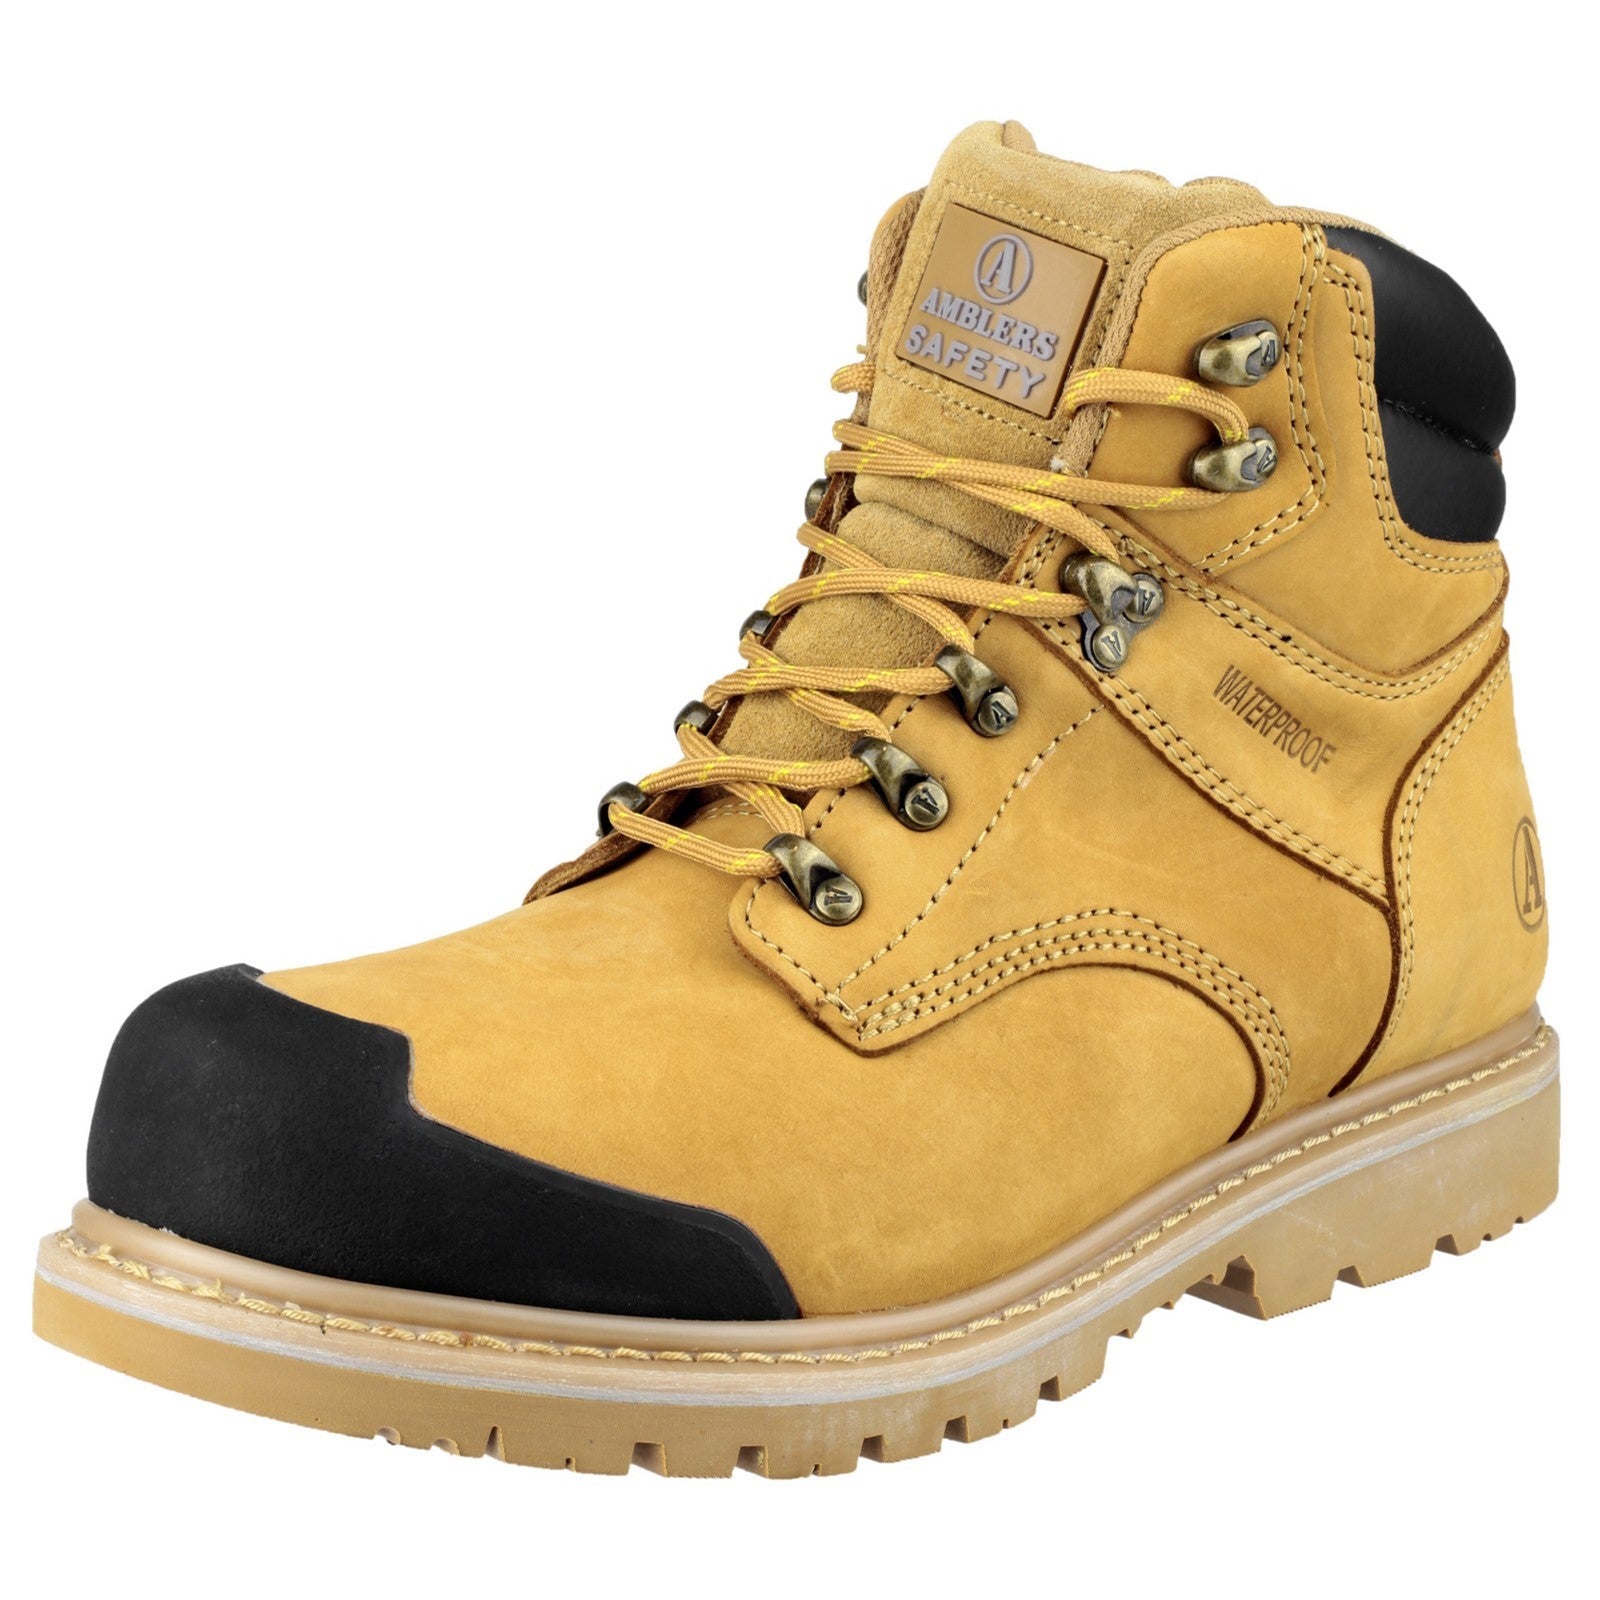 Amblers FS226 Industrial Safety Boot